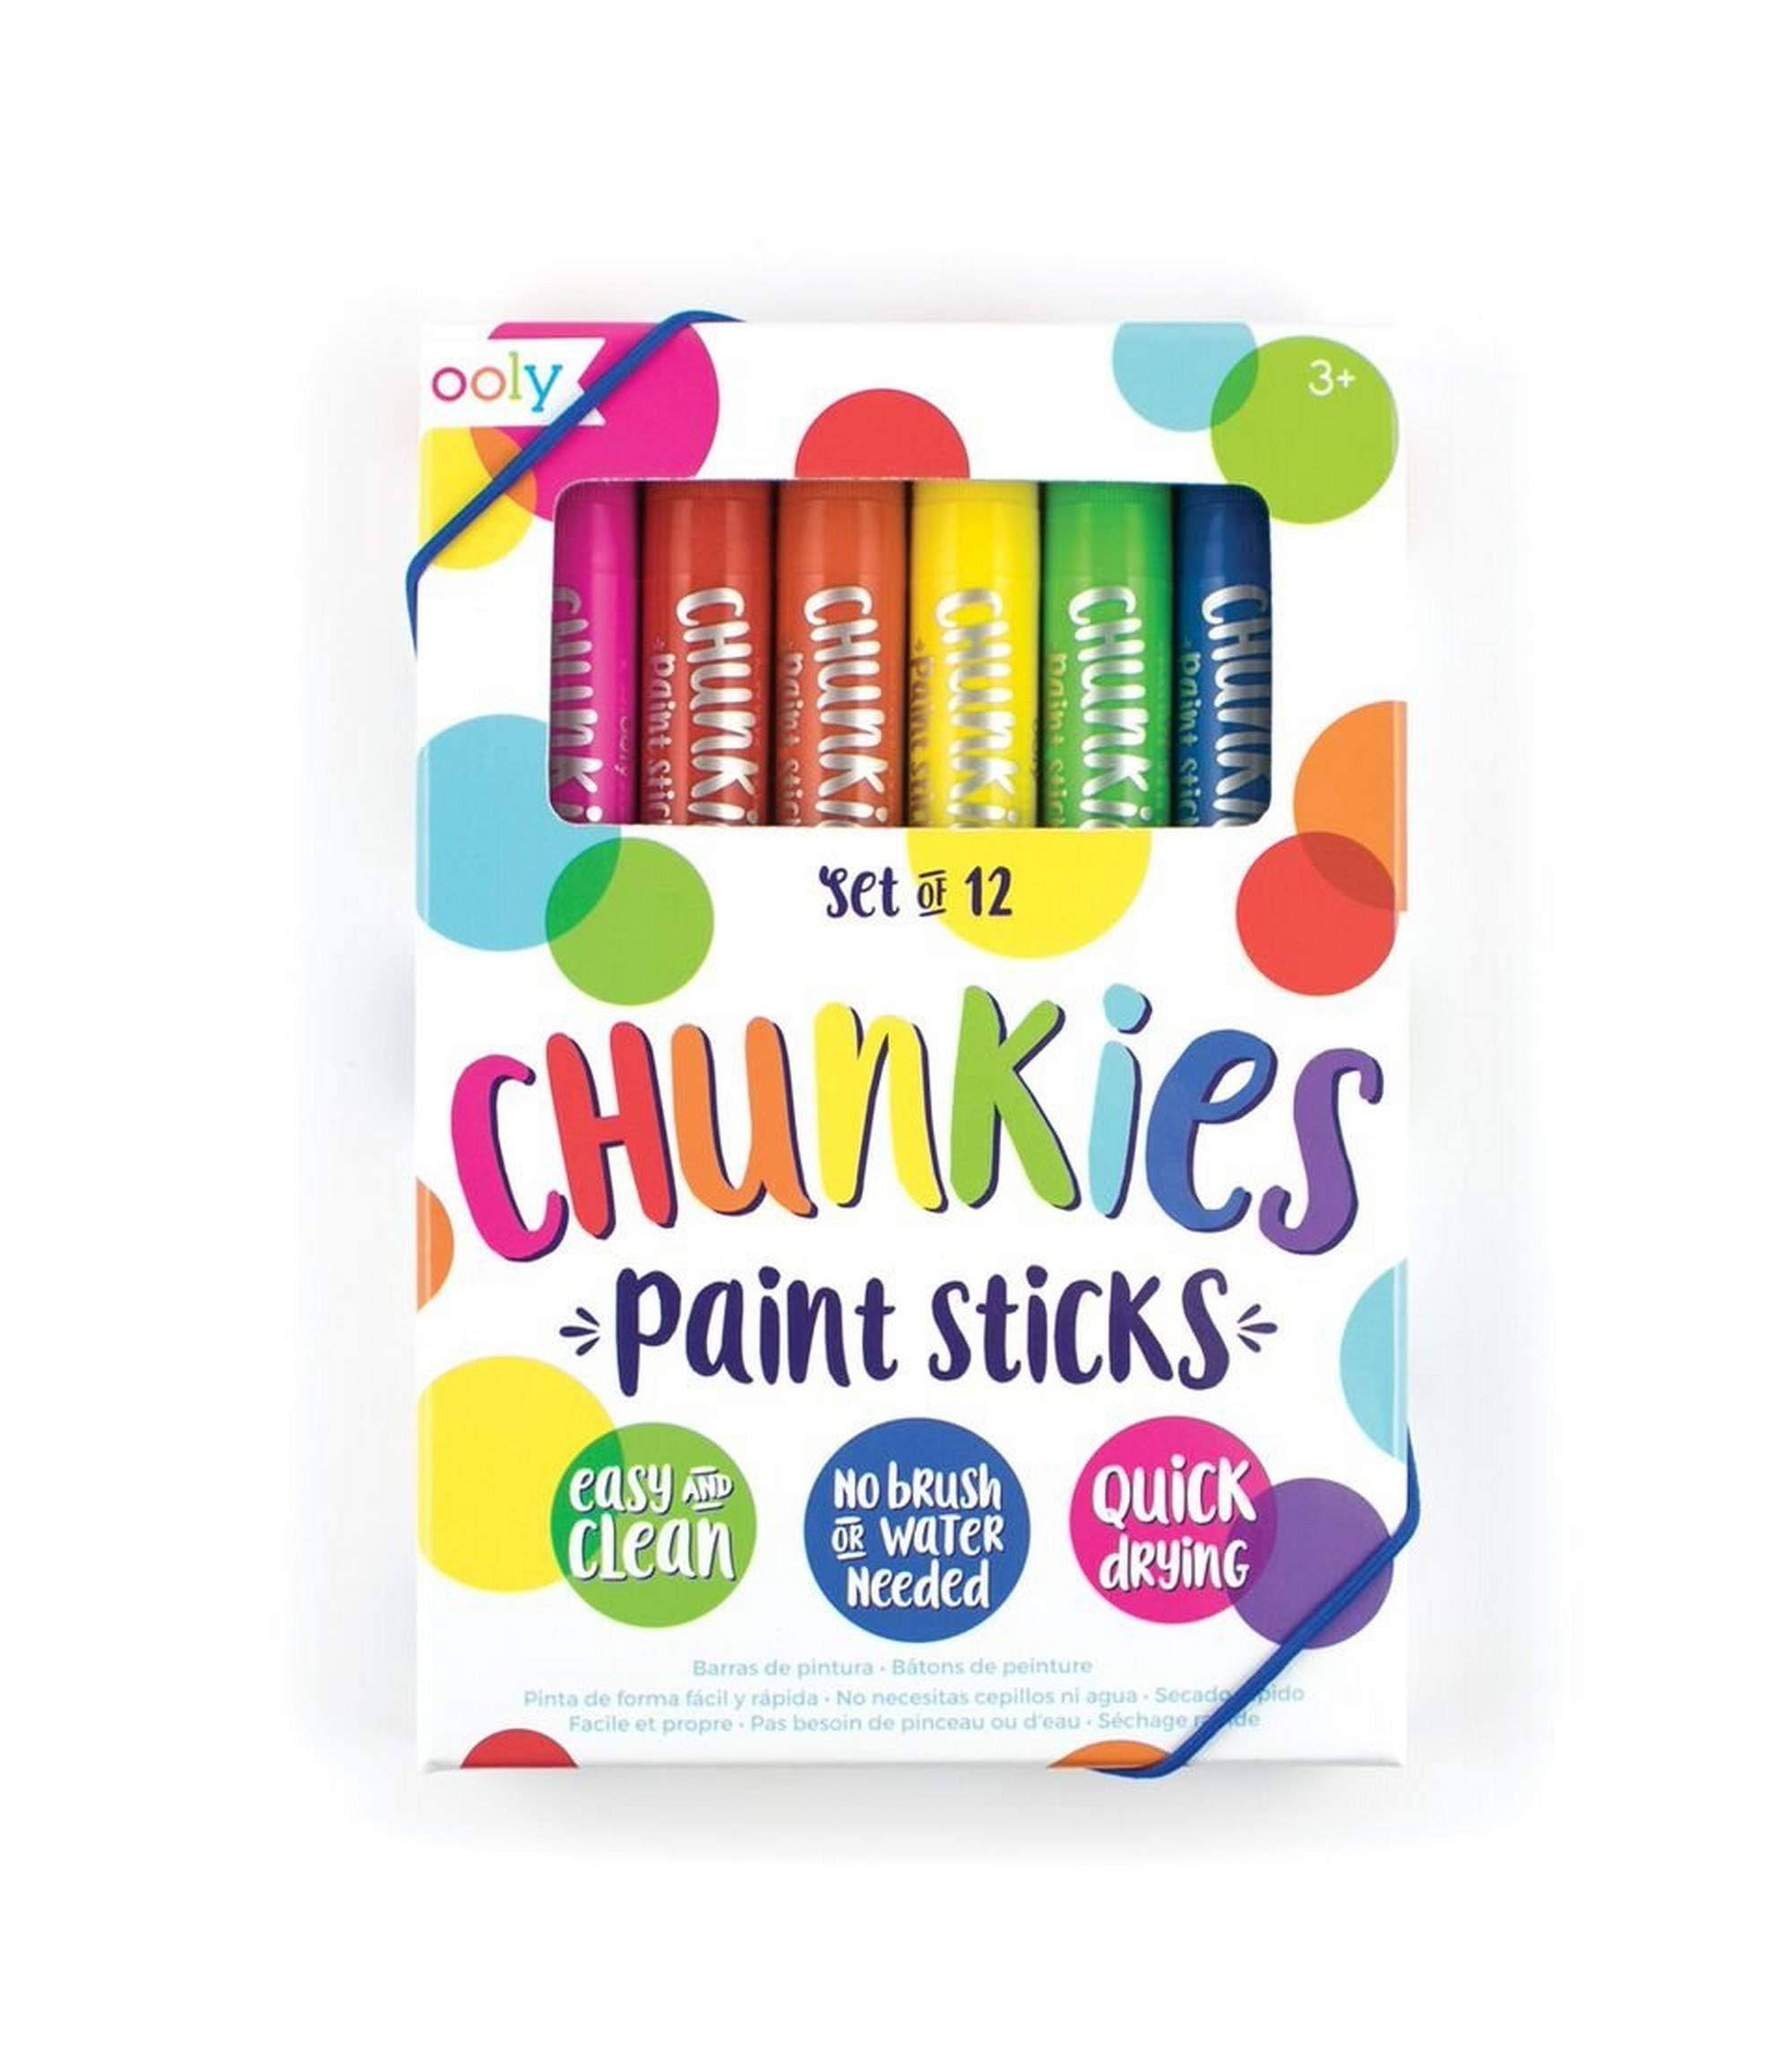 International Arrivals Is Now Newly Ooly Chunkies Paint Sticks - Set of 12